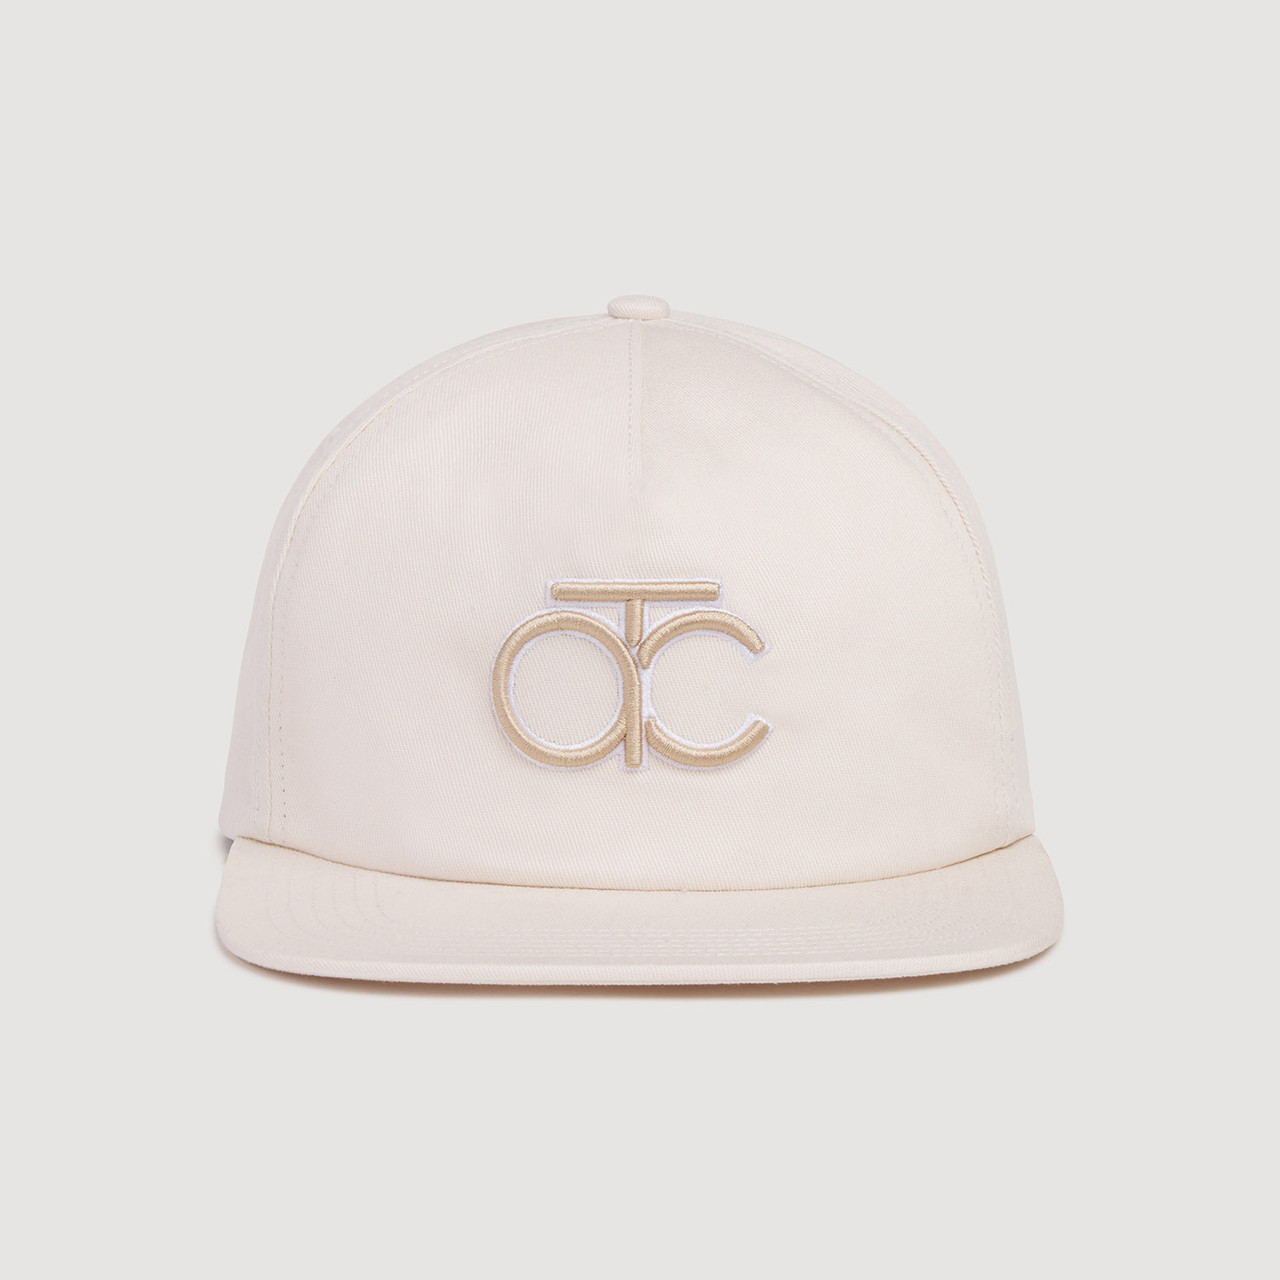 Cream with Tan Unstructured Cap embroidered with motif Actuate